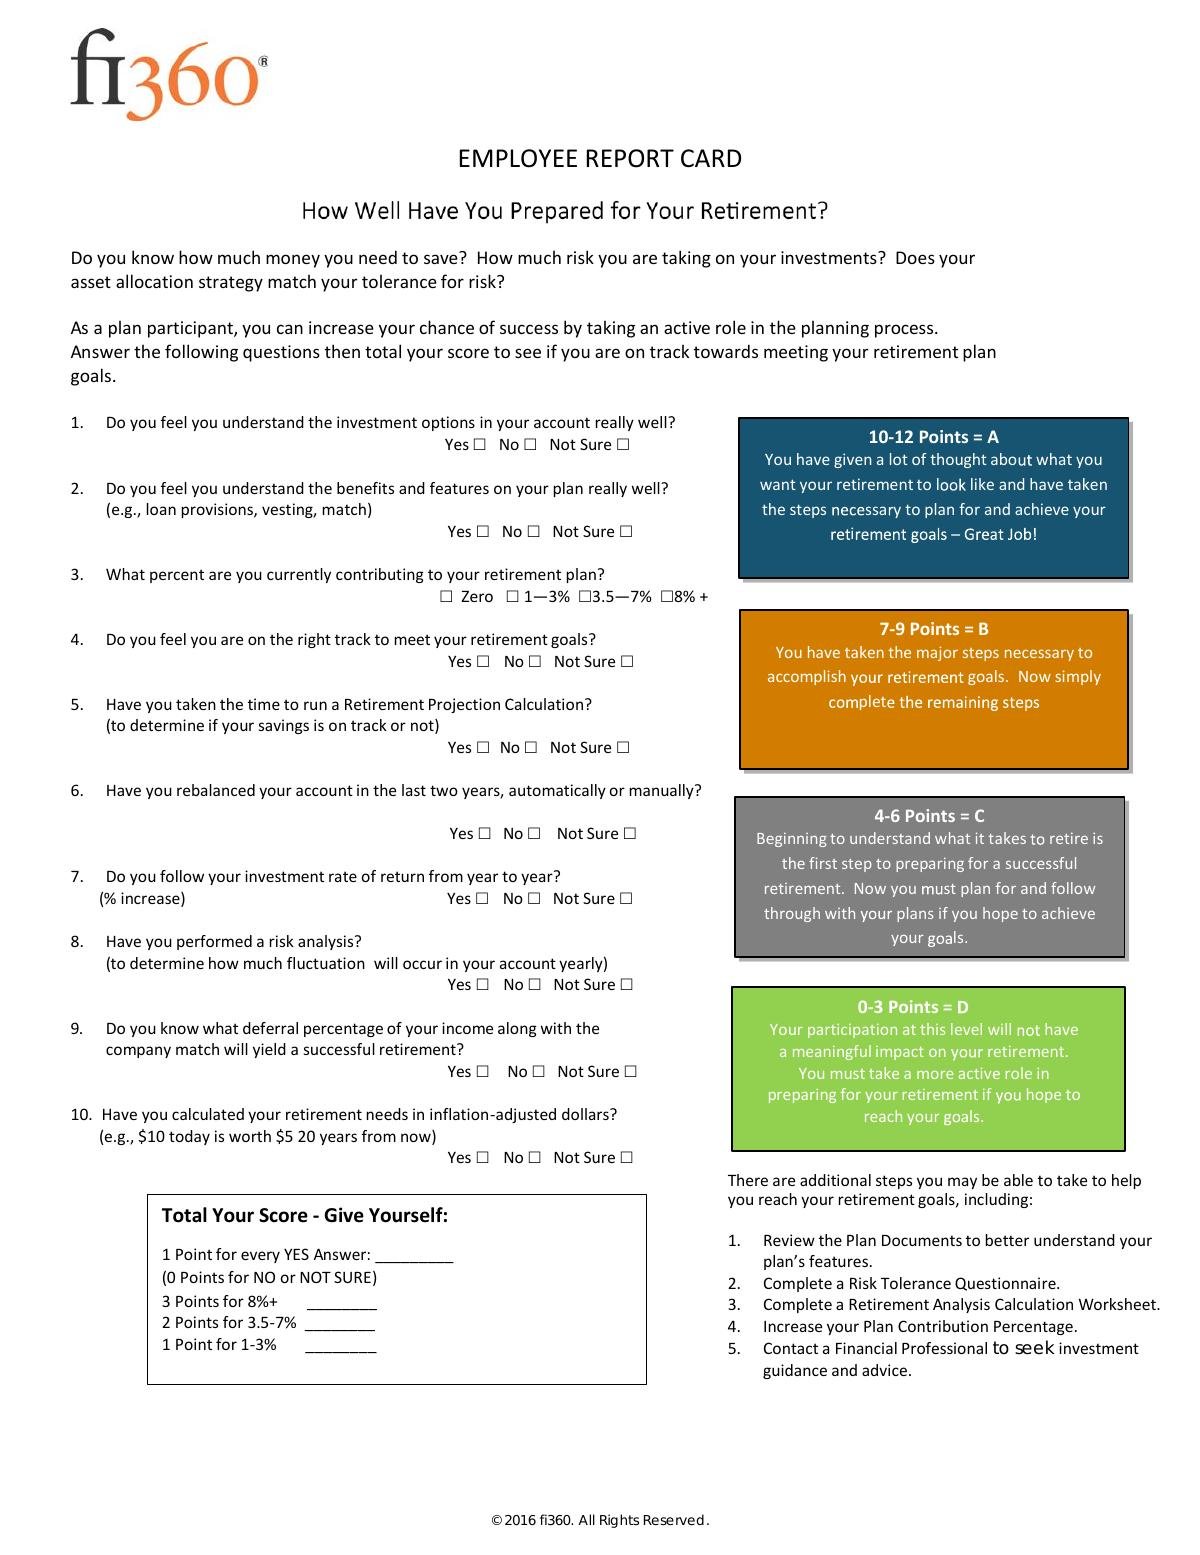 Employee Report Card - How Well Have You Prepared For Your Retirement